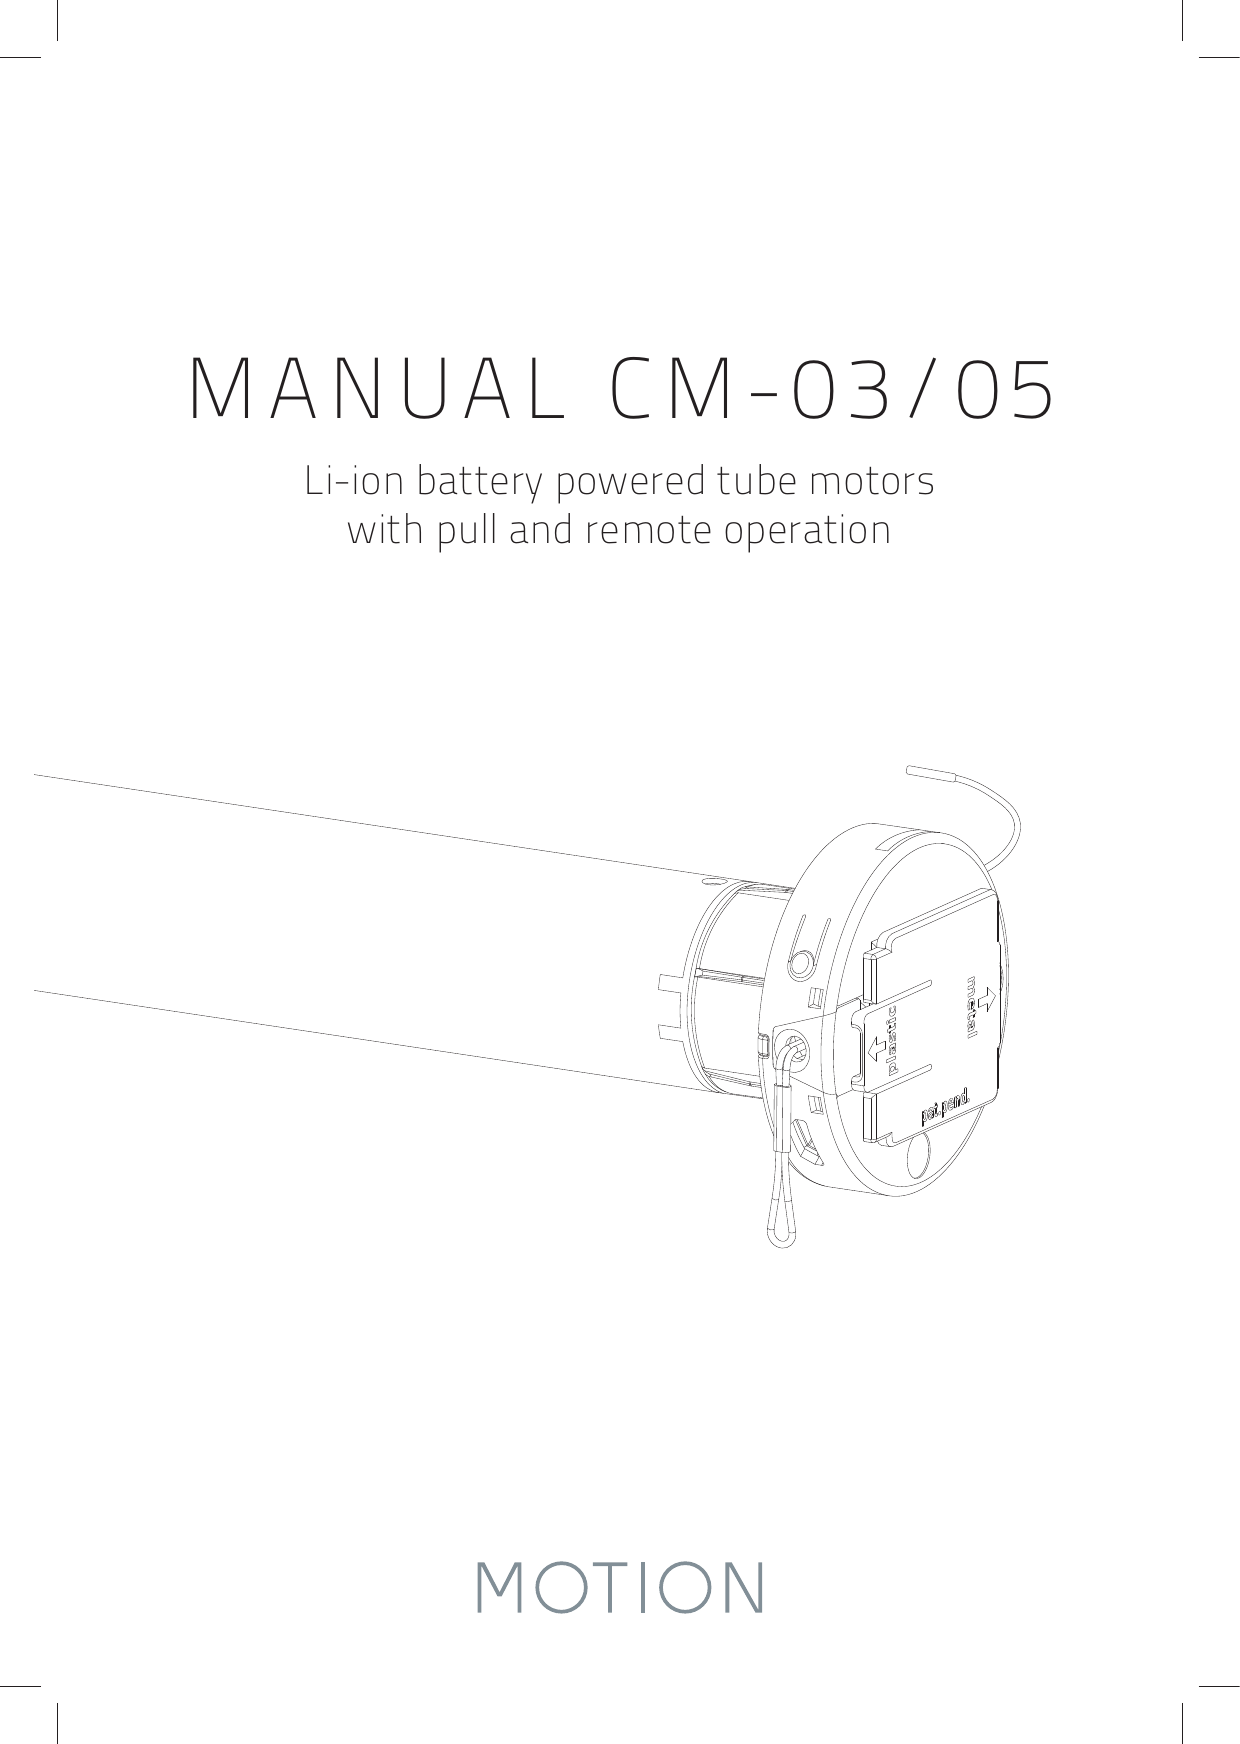 Li-ion battery powered tube motors with pull and remote operationMANUAL CM-03/05